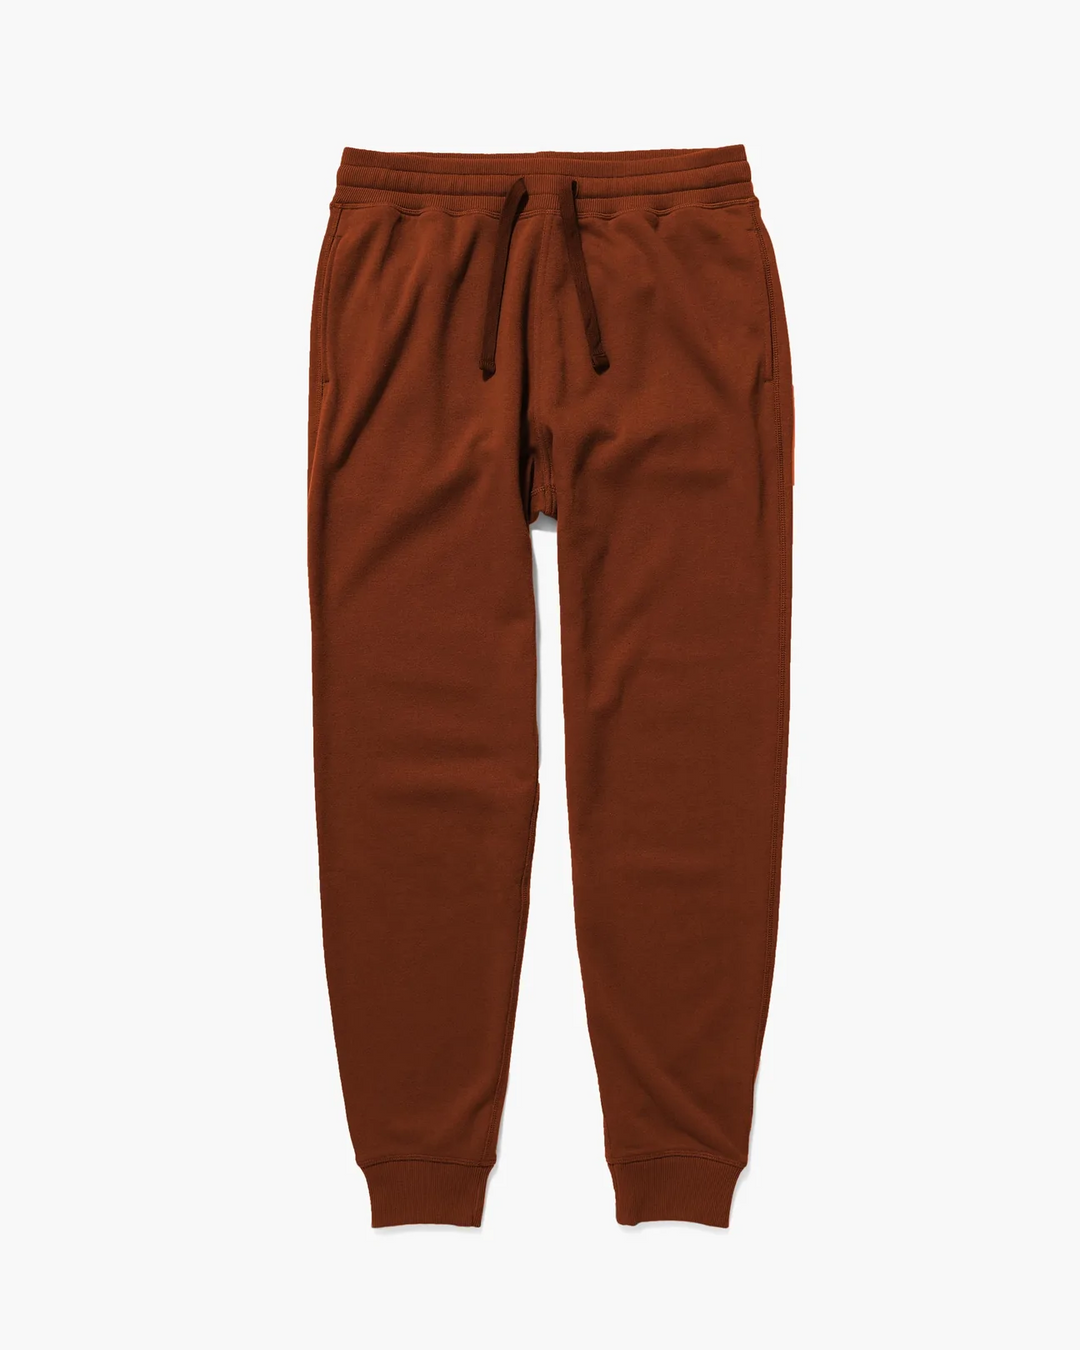 Richer Poorer - Recycled Fleece Sweatpants - Red Mahogany